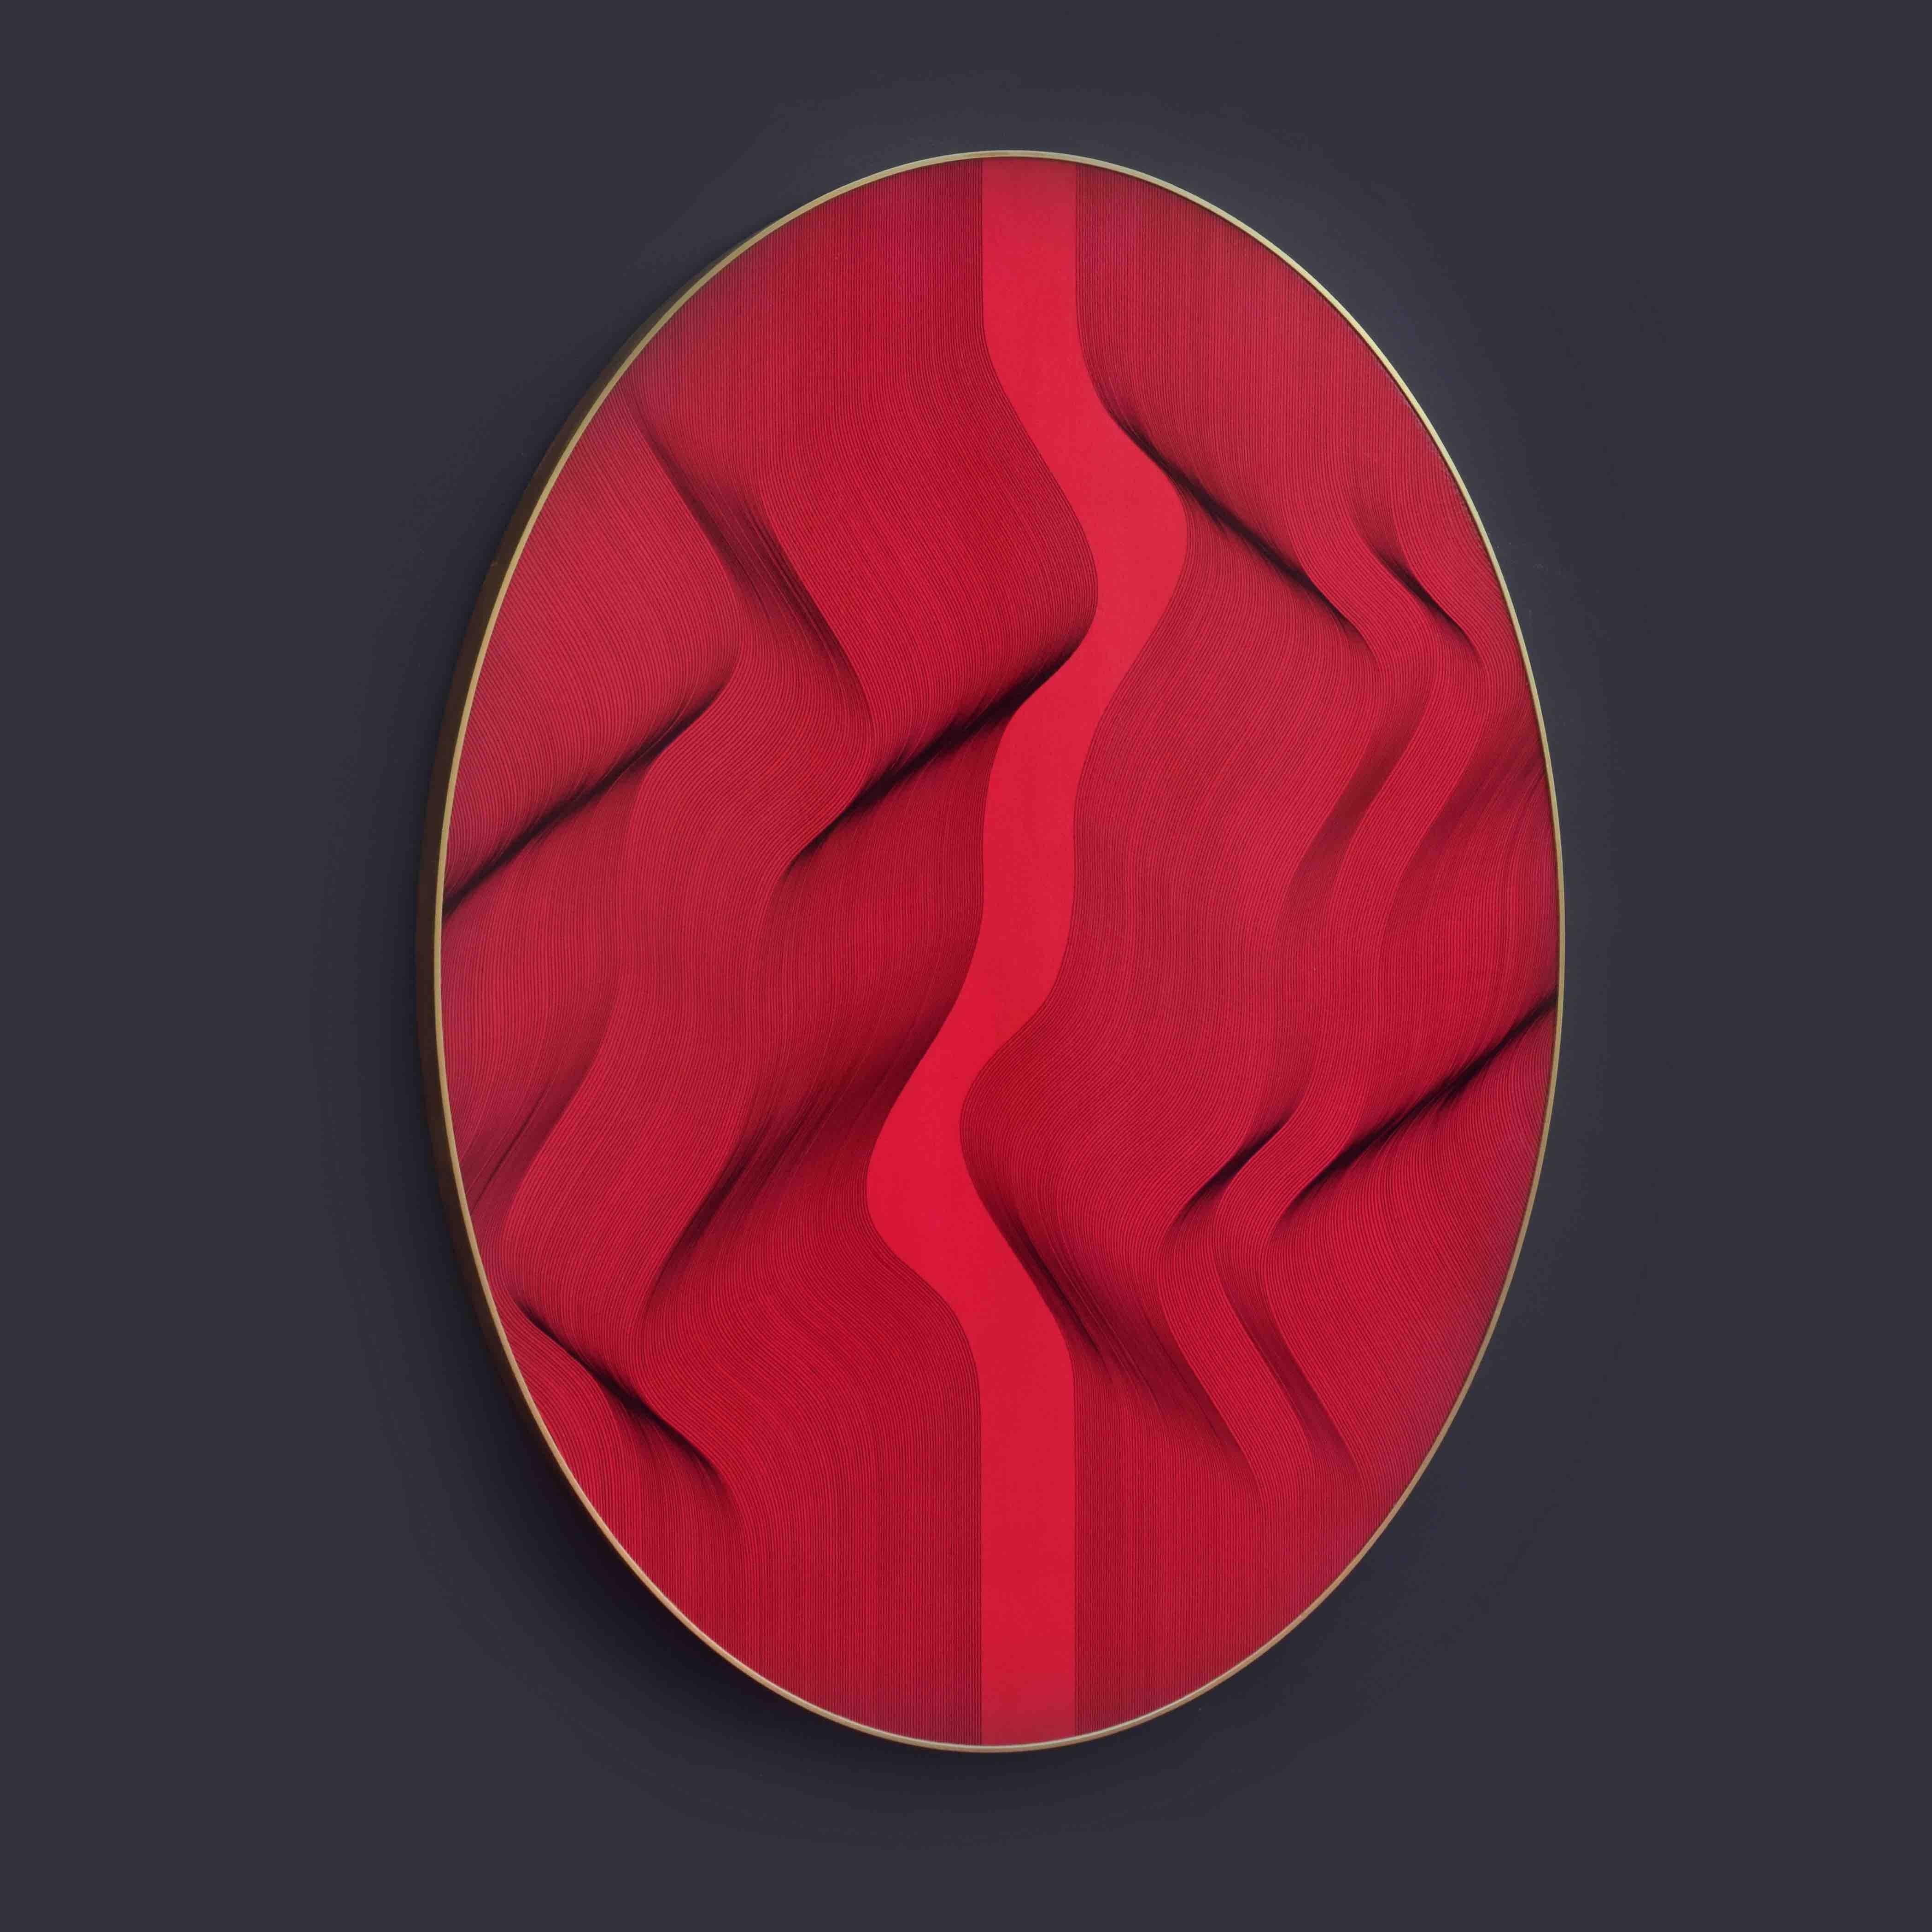 Red Oval 2022 - geometric abstract painting - Abstract Geometric Painting by Roberto Lucchetta